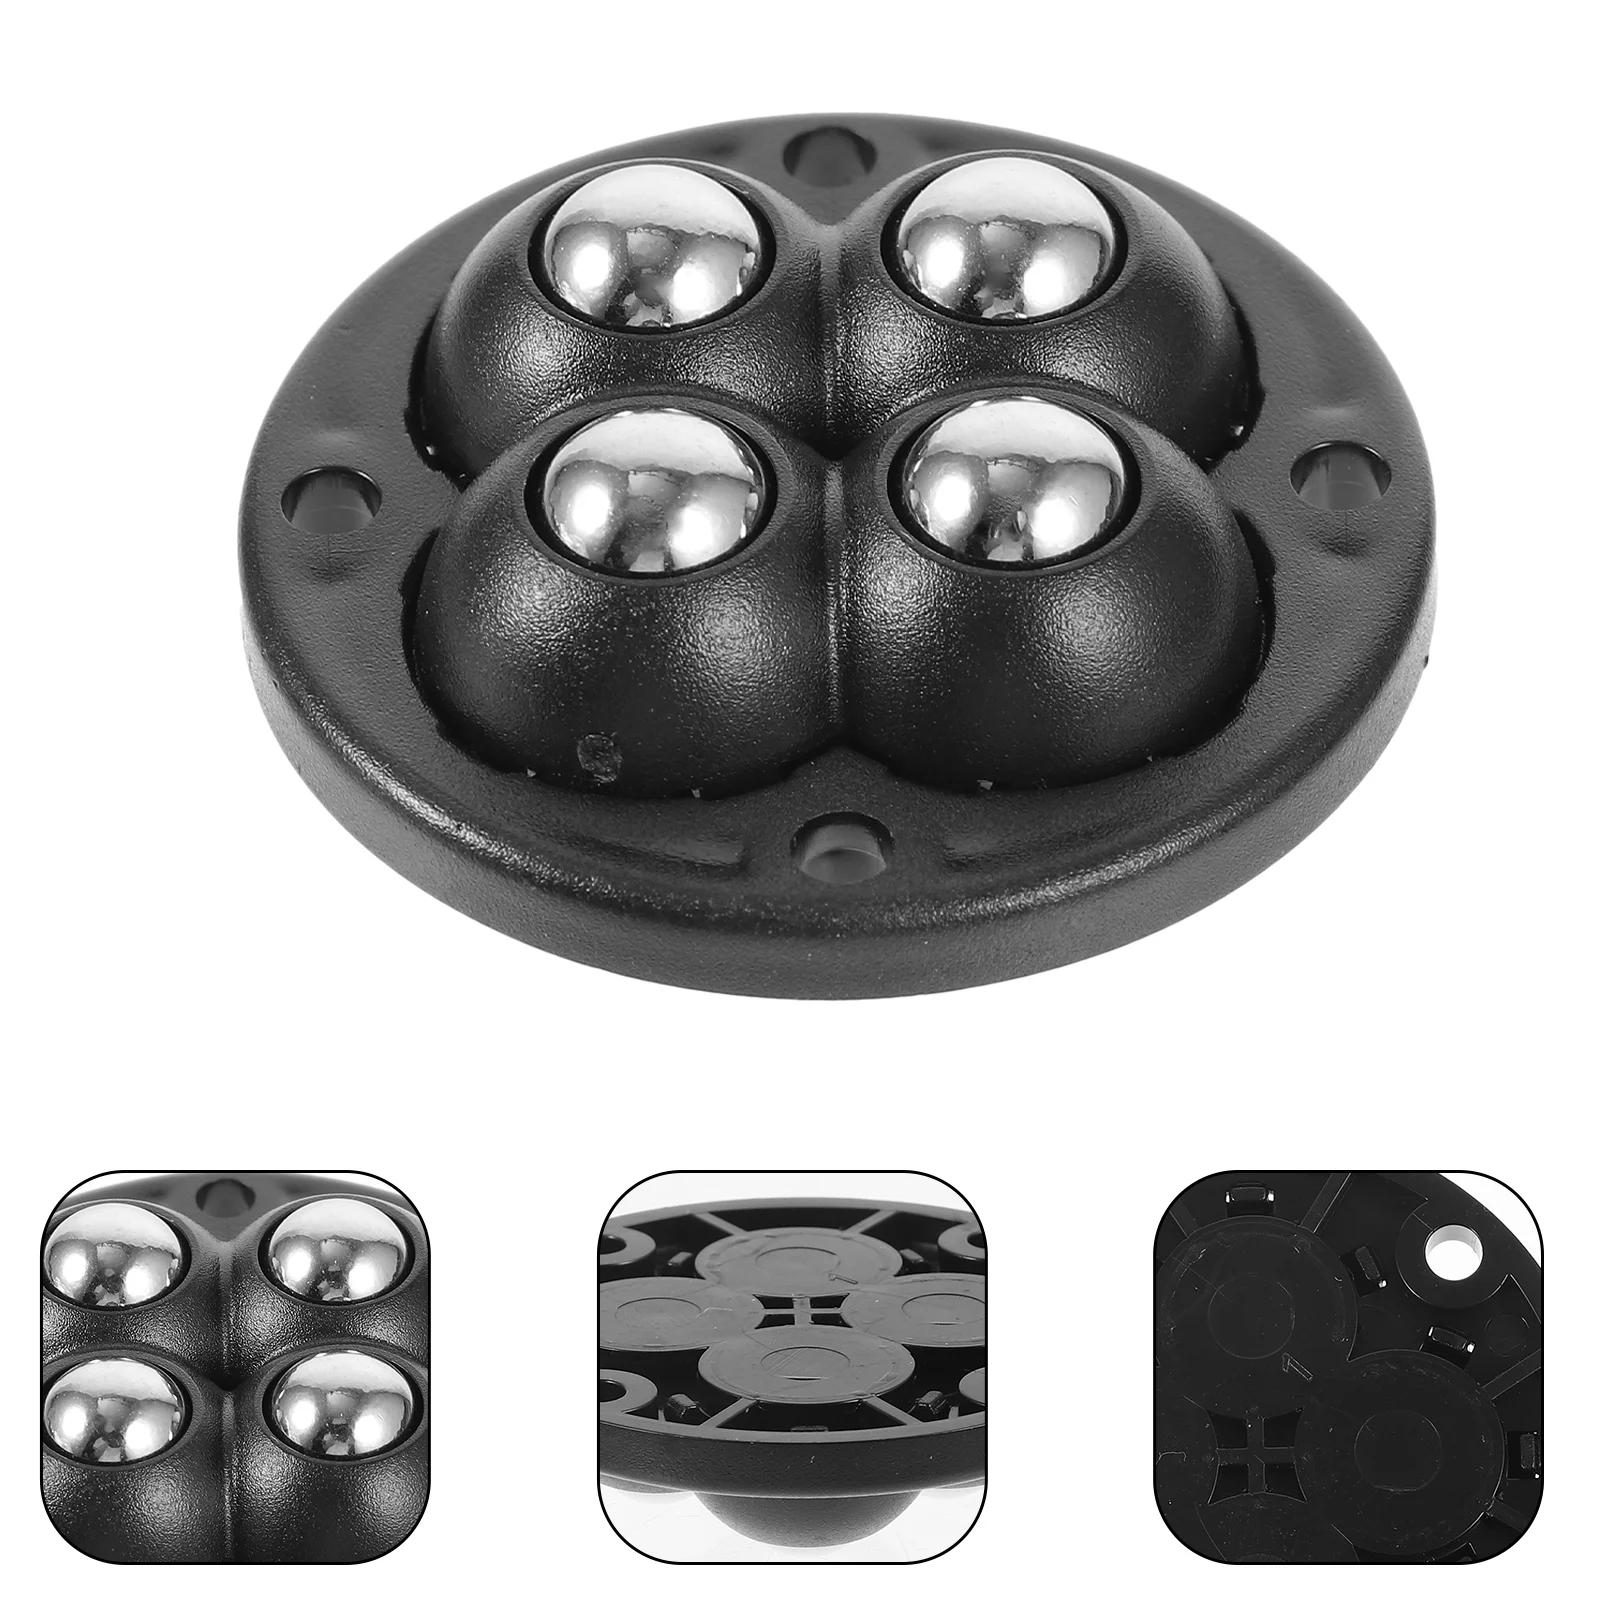 

4 Pcs Ball Pulley Sticky Wheels Trash Can Caster Casters Storage Chests Bin Adhesive Swivel Abs Case